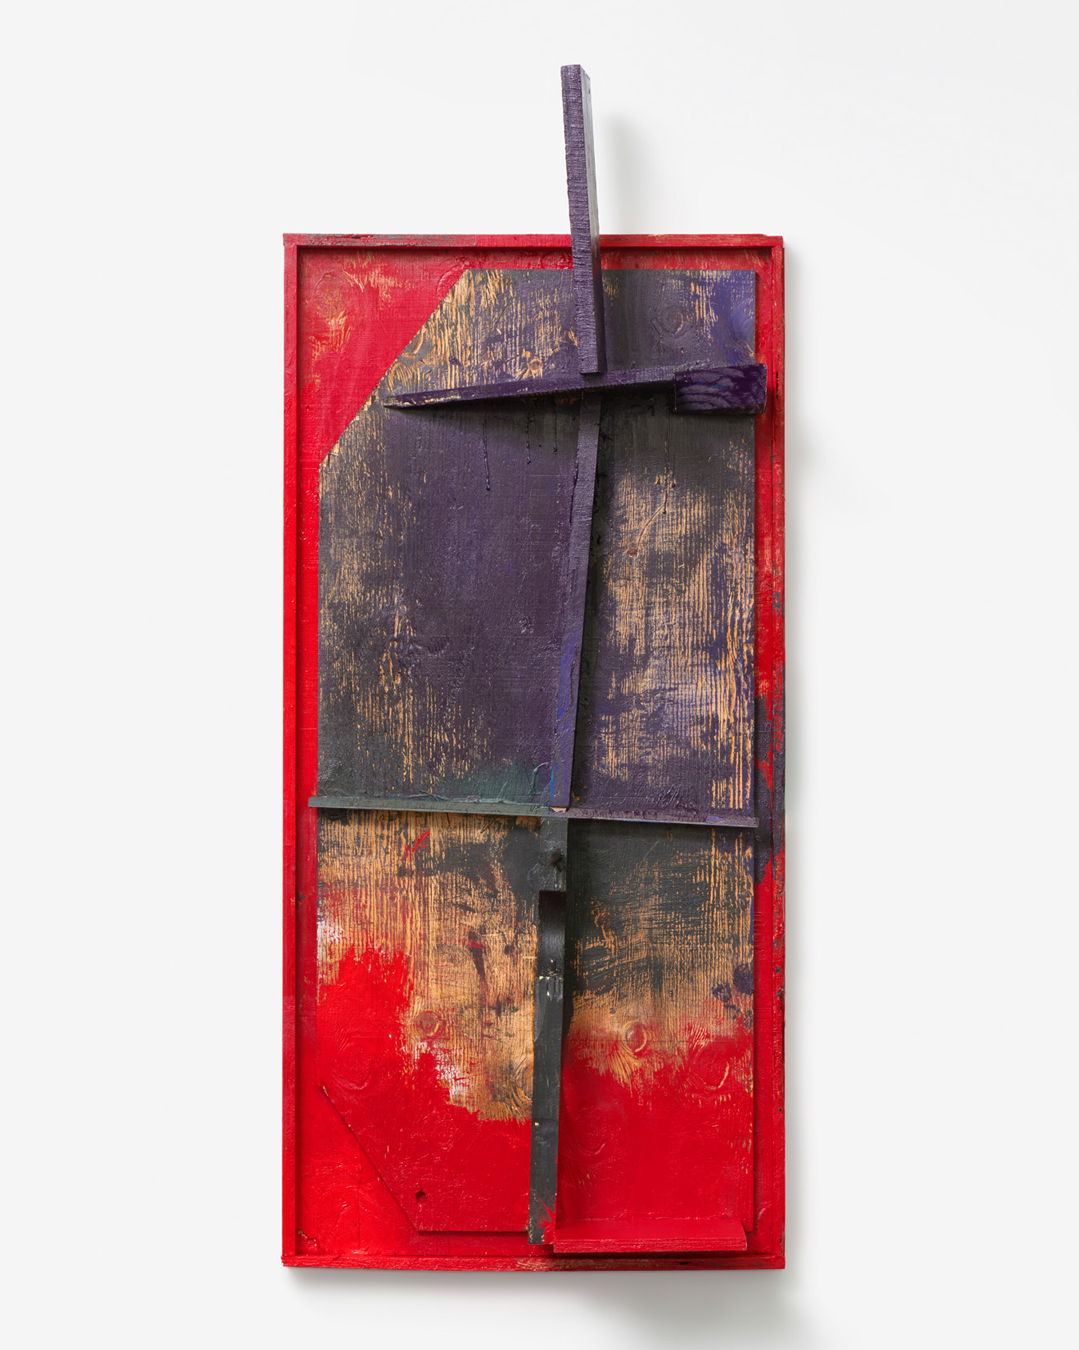 Sterling Ruby REIF. 7238., 2020 wood and paint 111,8 x 48,3 x 21,3 cm Photo-credit : Robert Wedemeyer, Los Angeles Courtesy : the Artist and Xavier Hufkens, Brussels